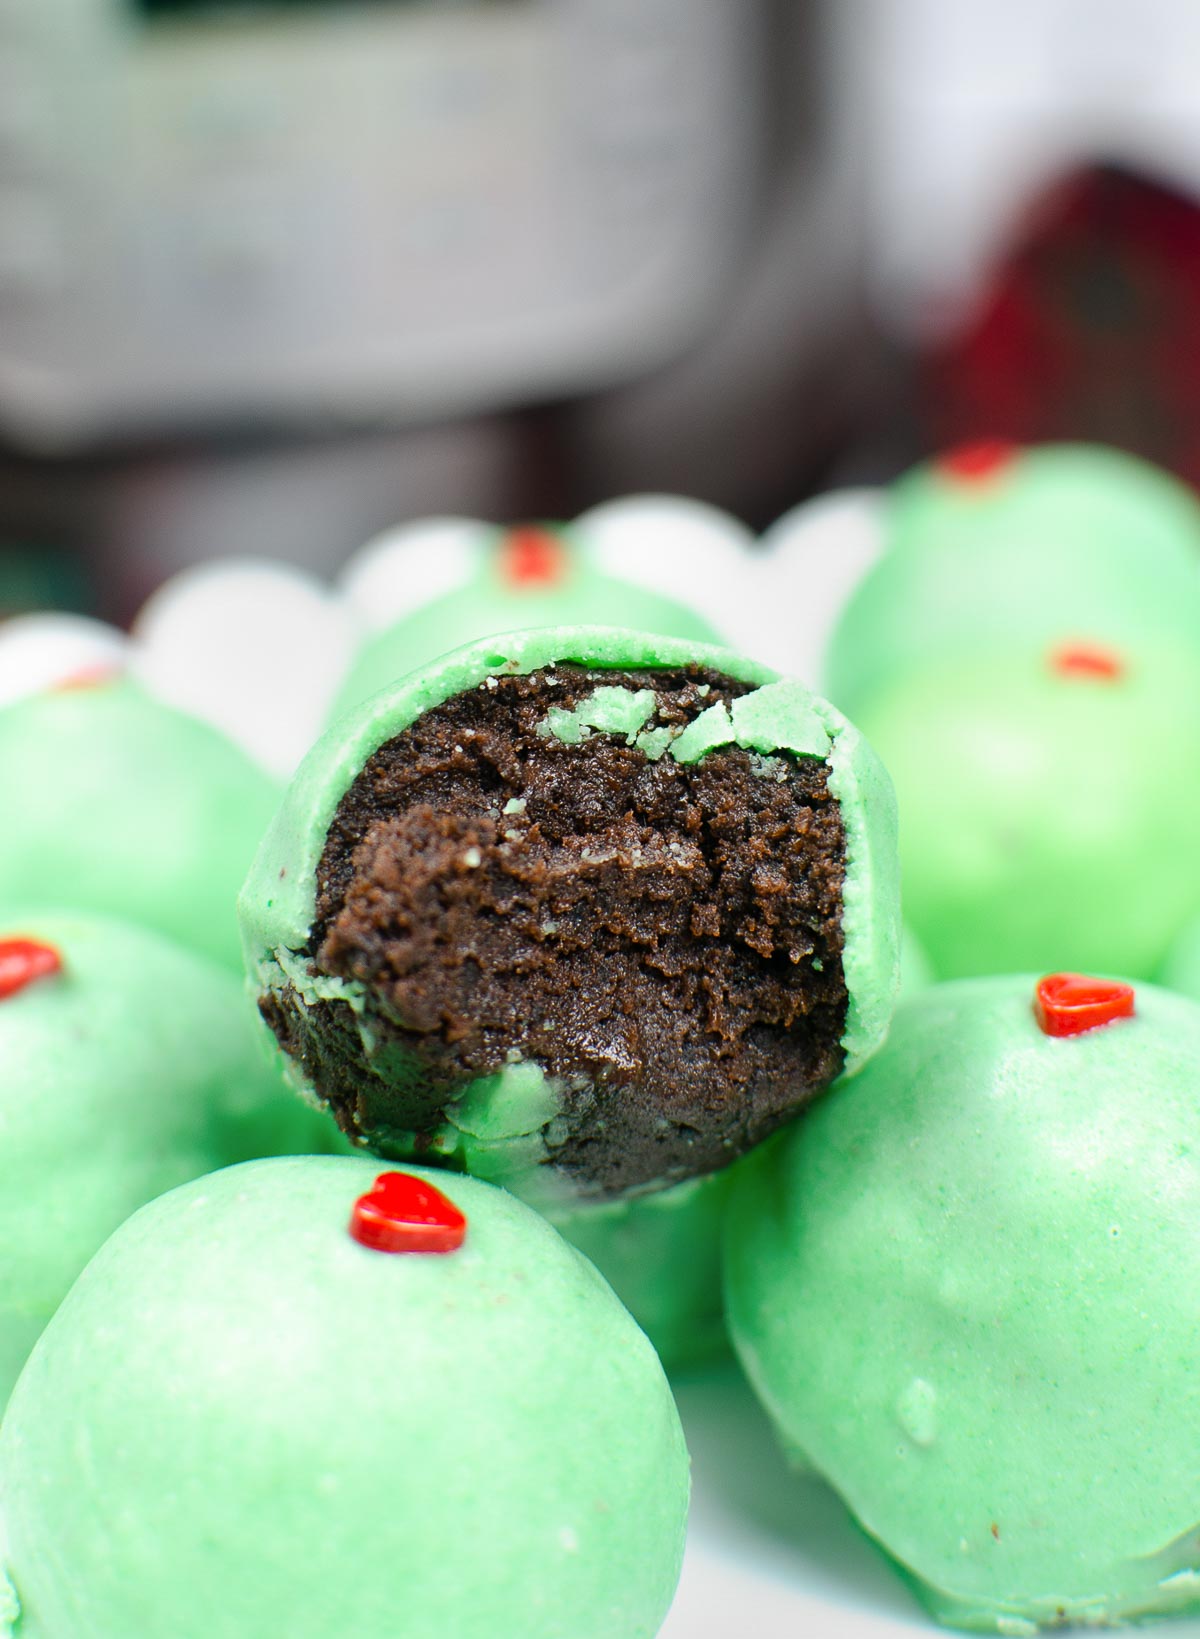 Grinch Truffle cut in half to show chocolate cake ball and texture.